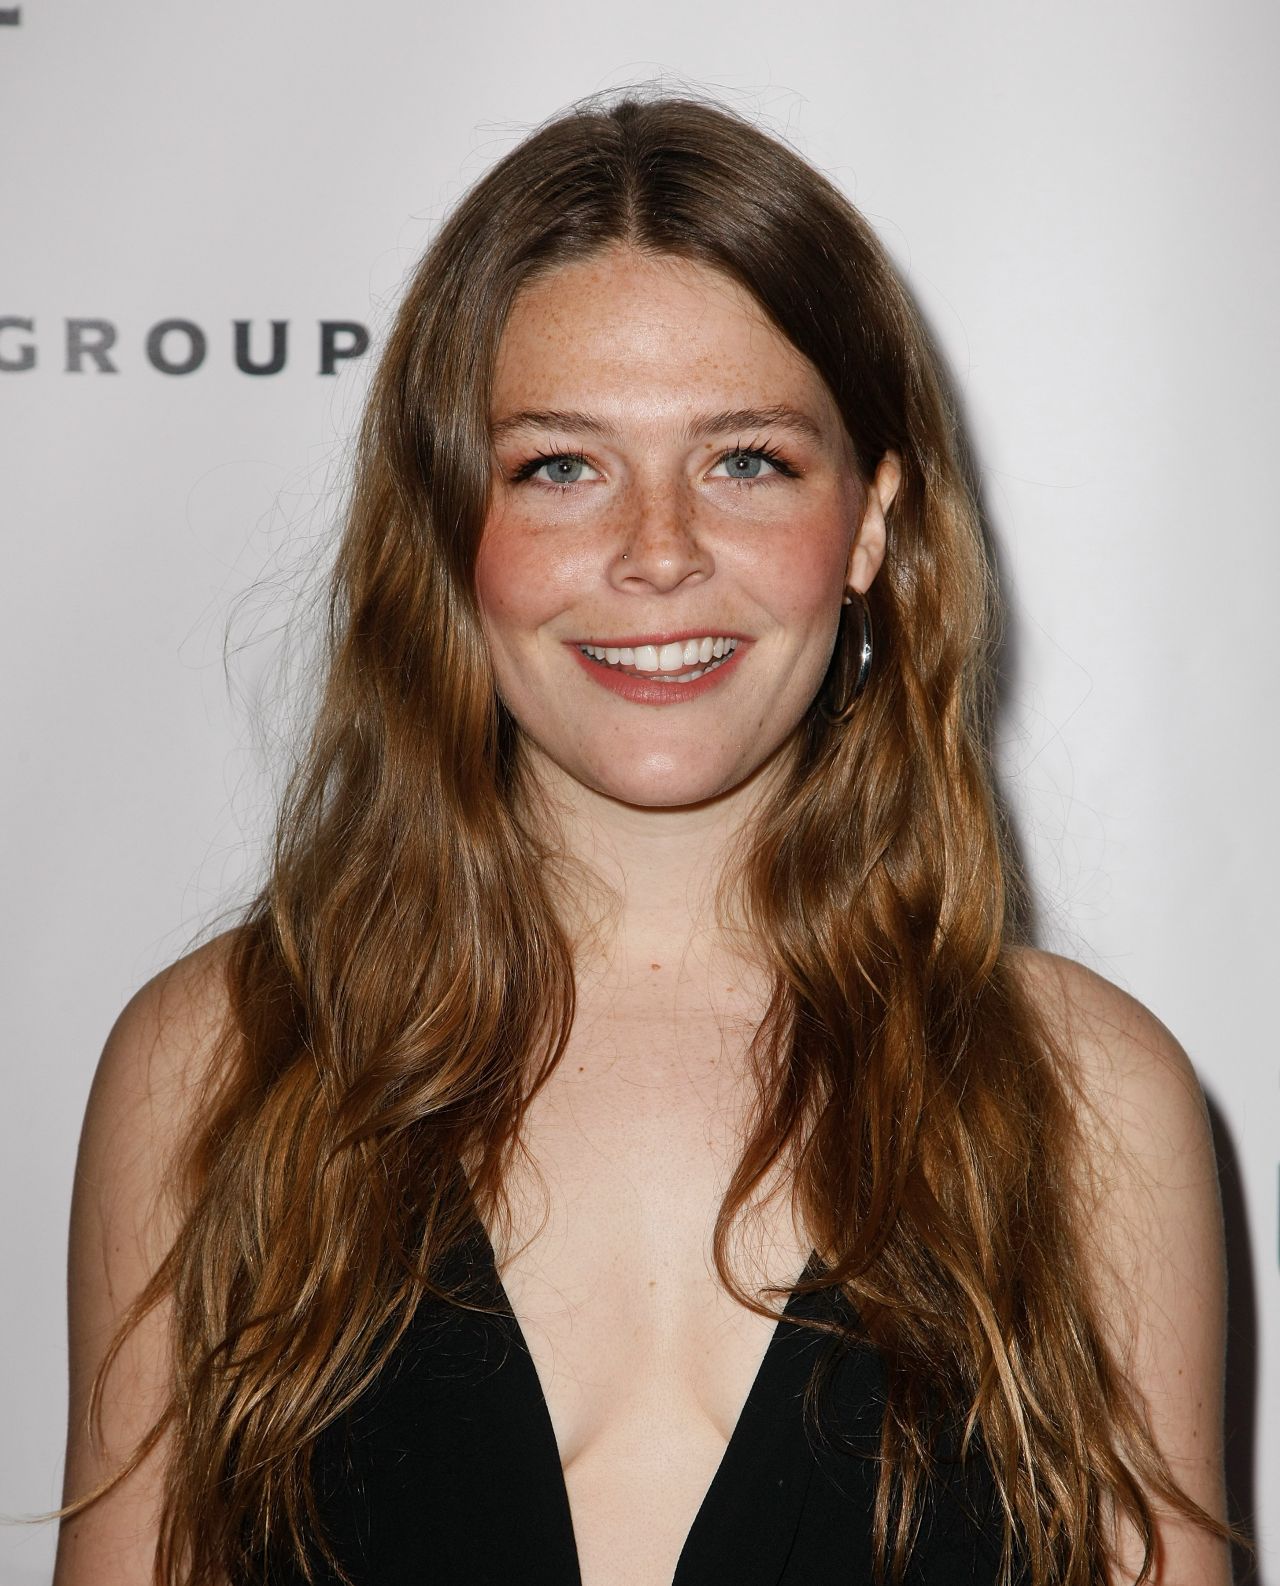 maggie-rogers-universal-music-group-grammy-after-party-02-10-2019-2.jpg